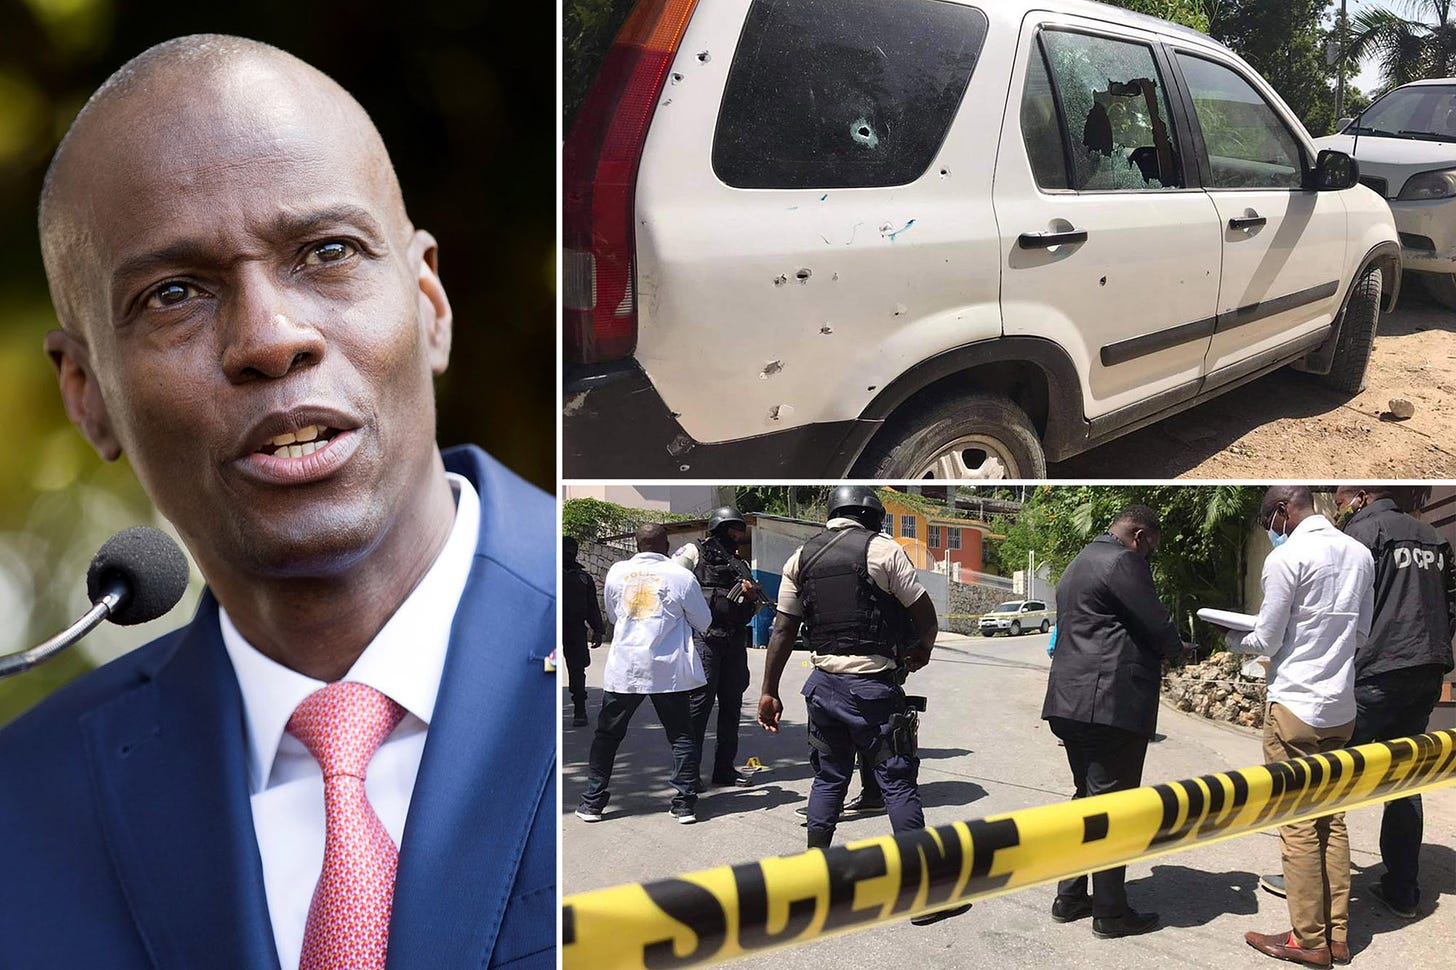 The aftermath of President Jovenel Moïse's assassination in Haiti